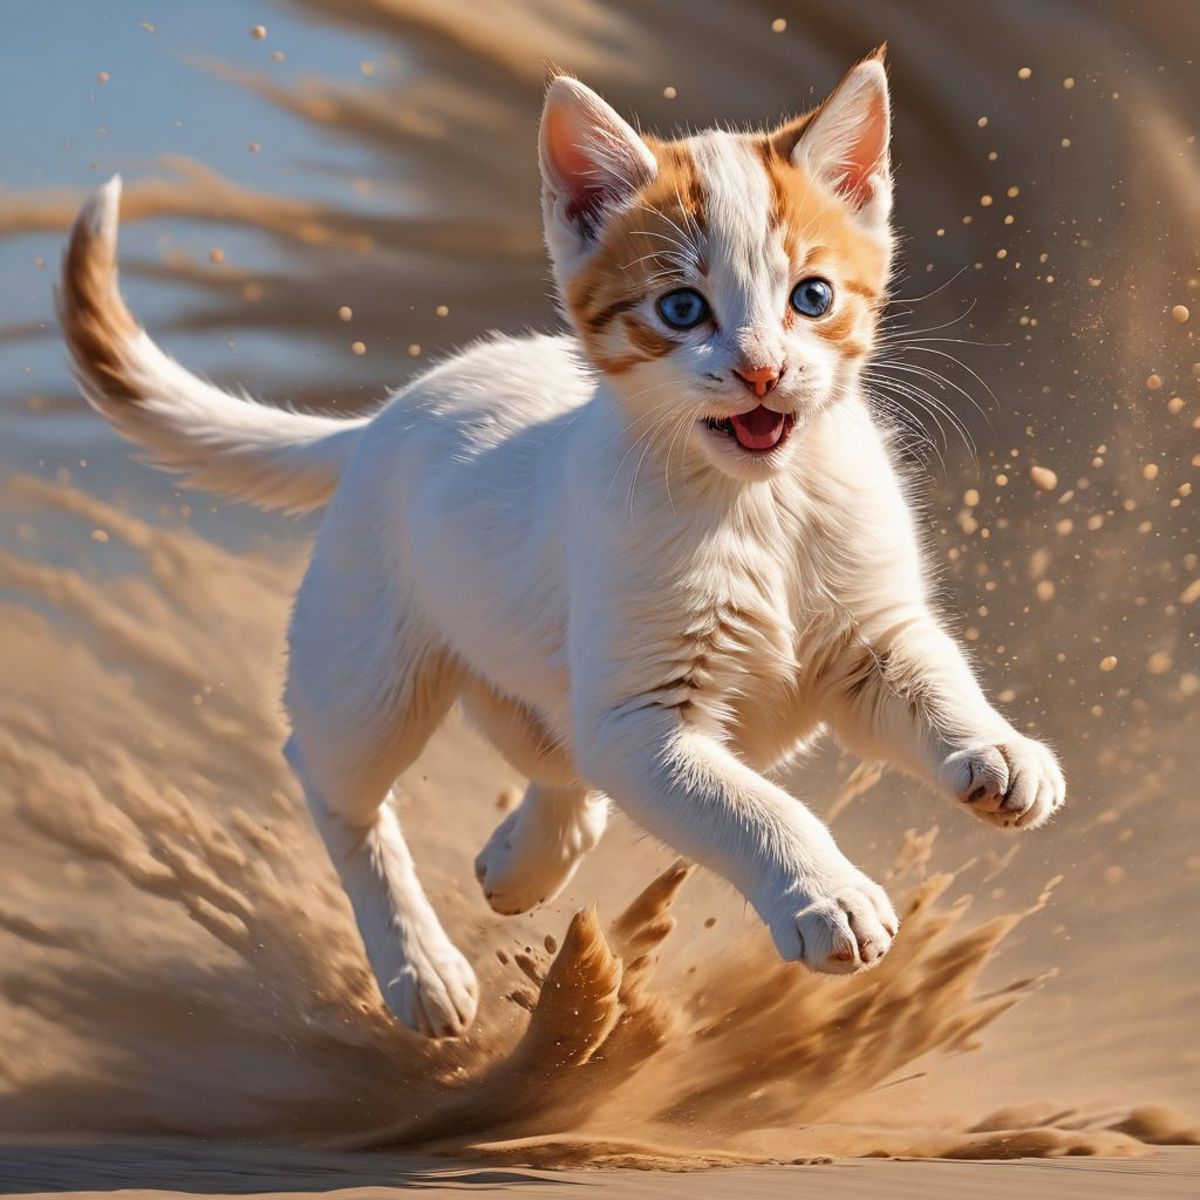 Adorable Kitten Playing in the Sand with Blue Eyes